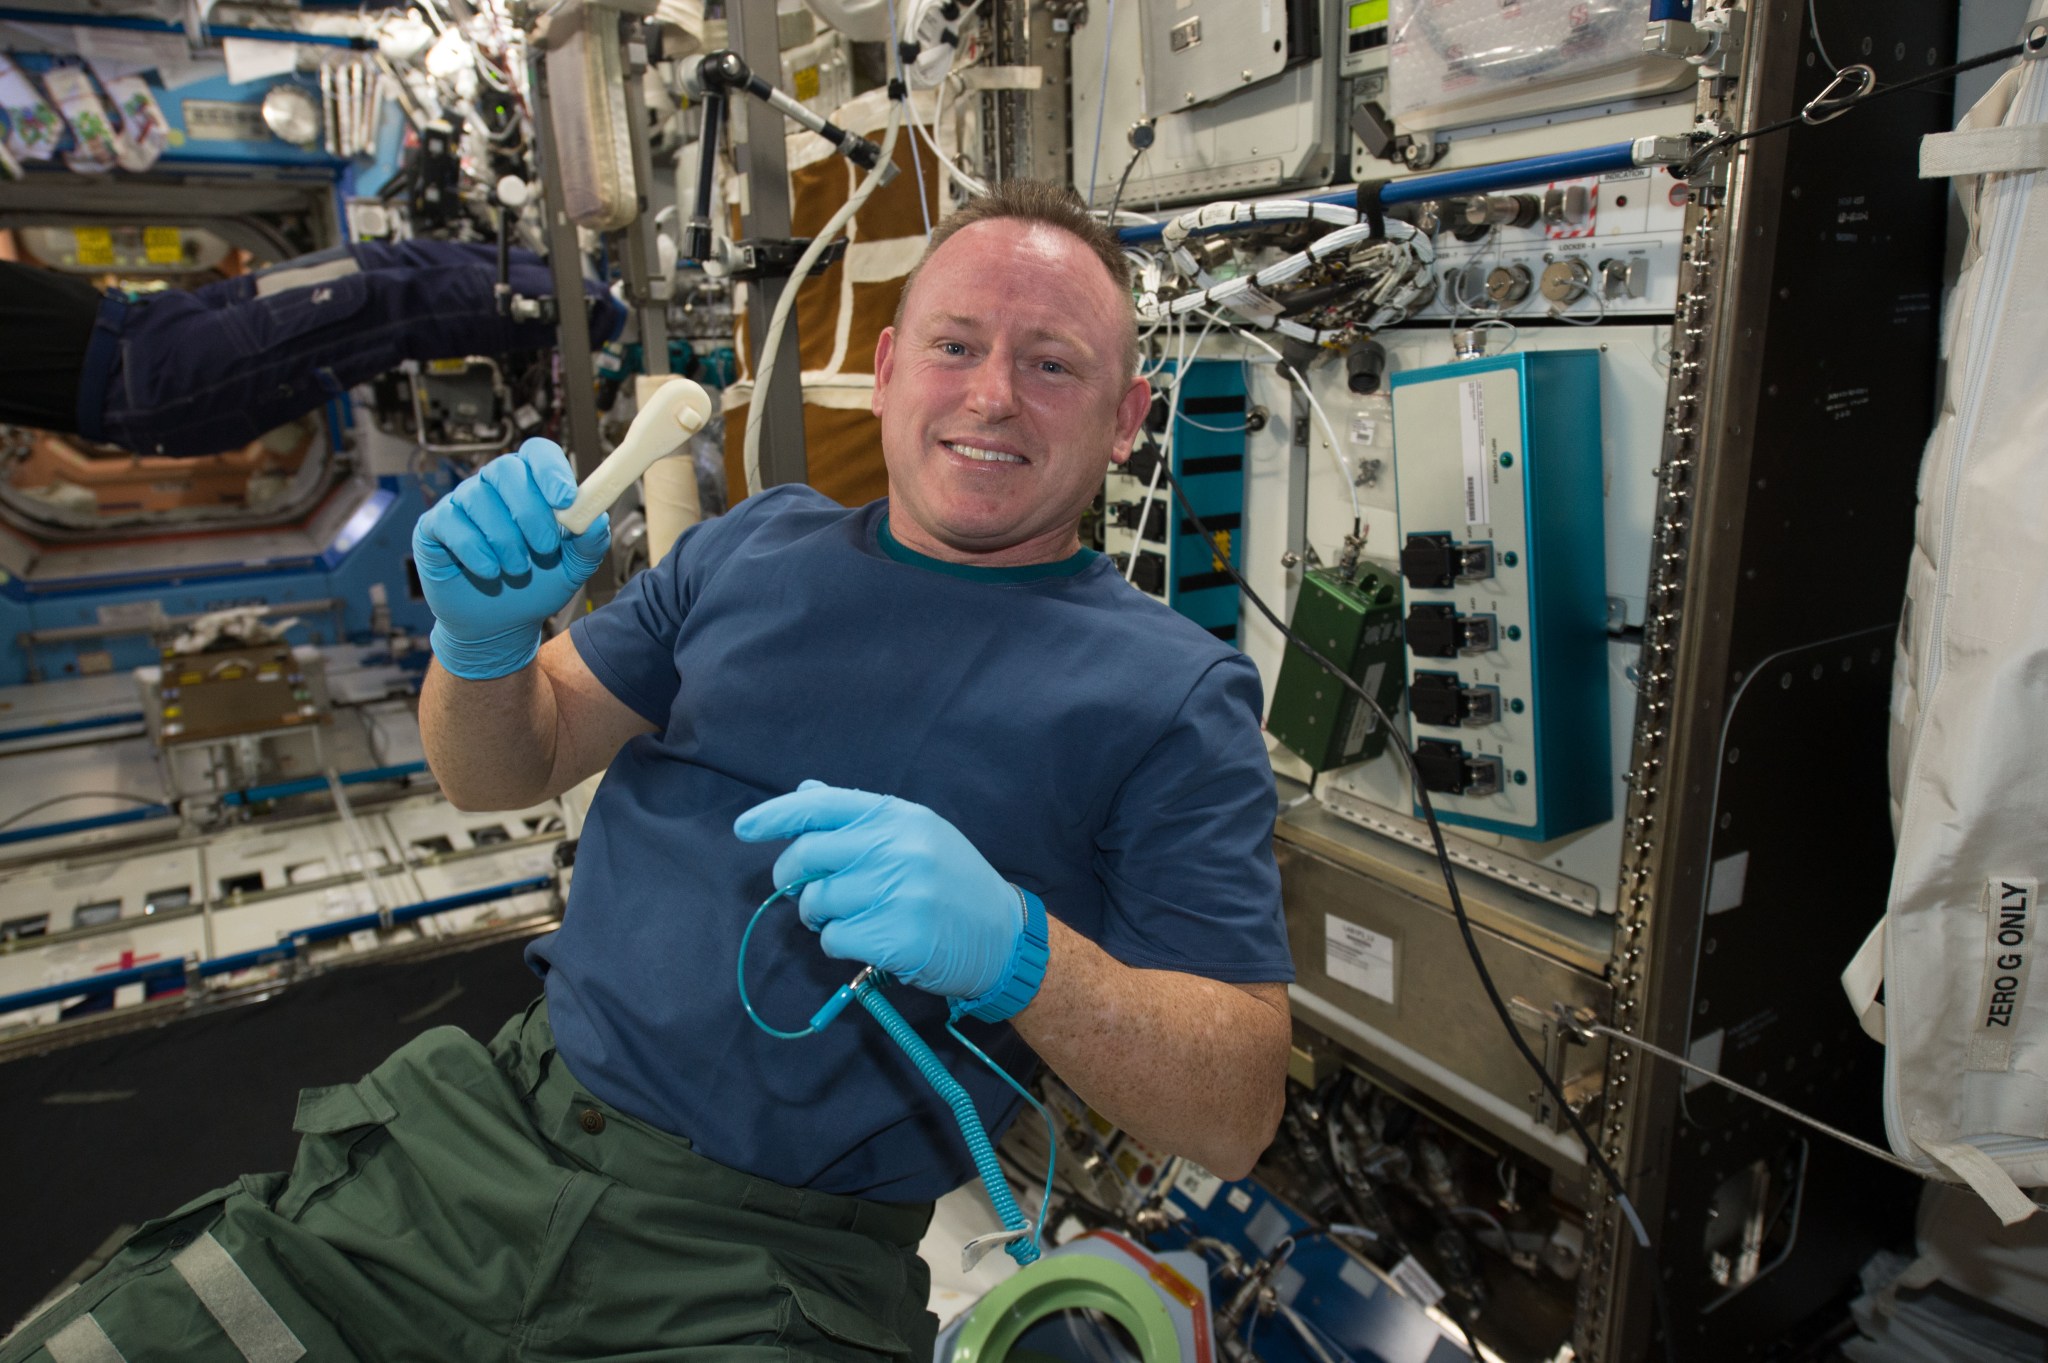 Astronaut Barry (Butch) Wilmore holds a ratchet wrench inside the space station